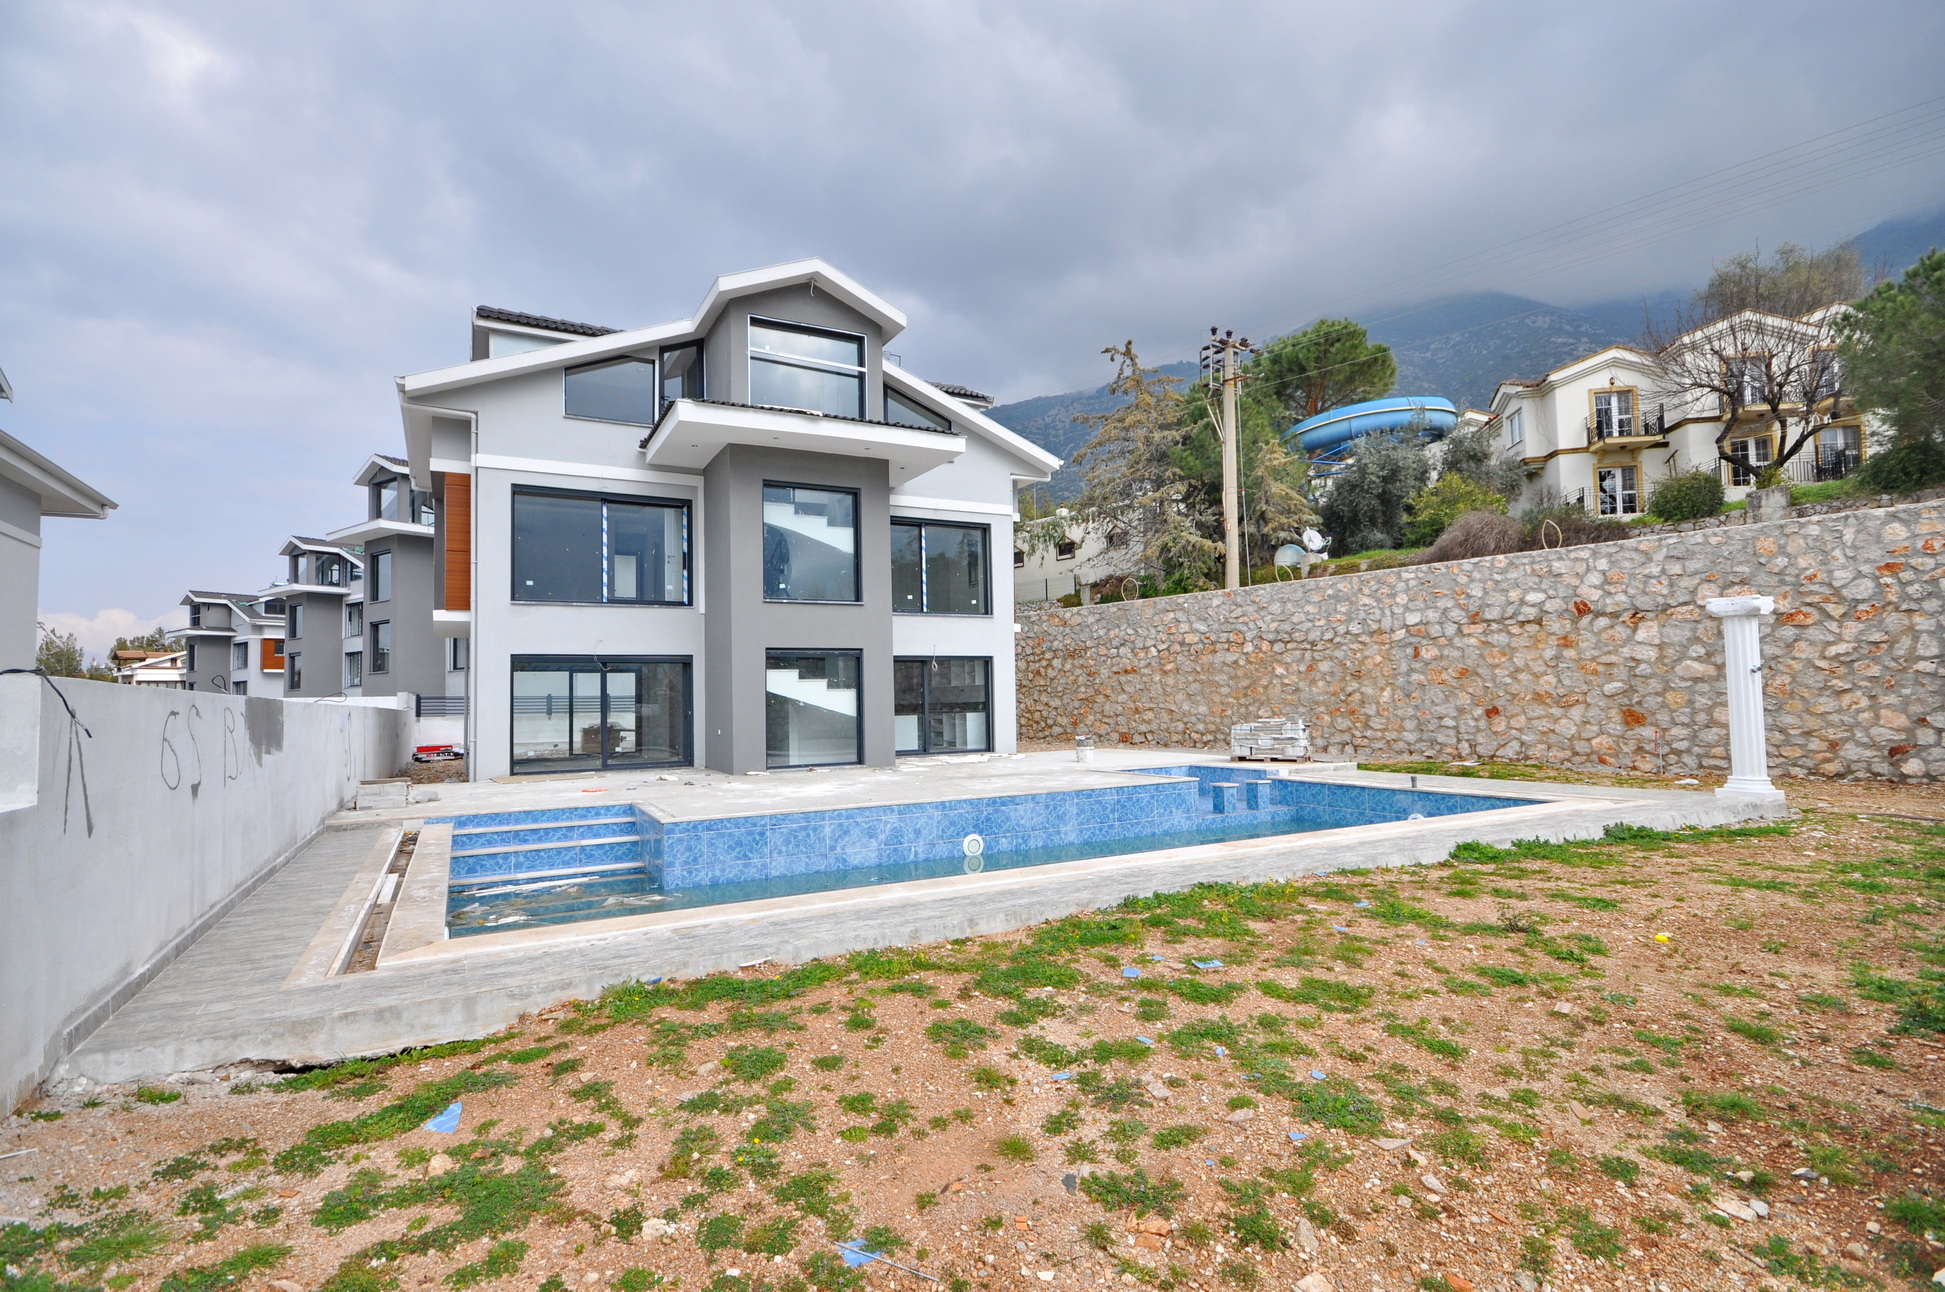 Brand New 4 Bedroom Detached Villa in a Great Location